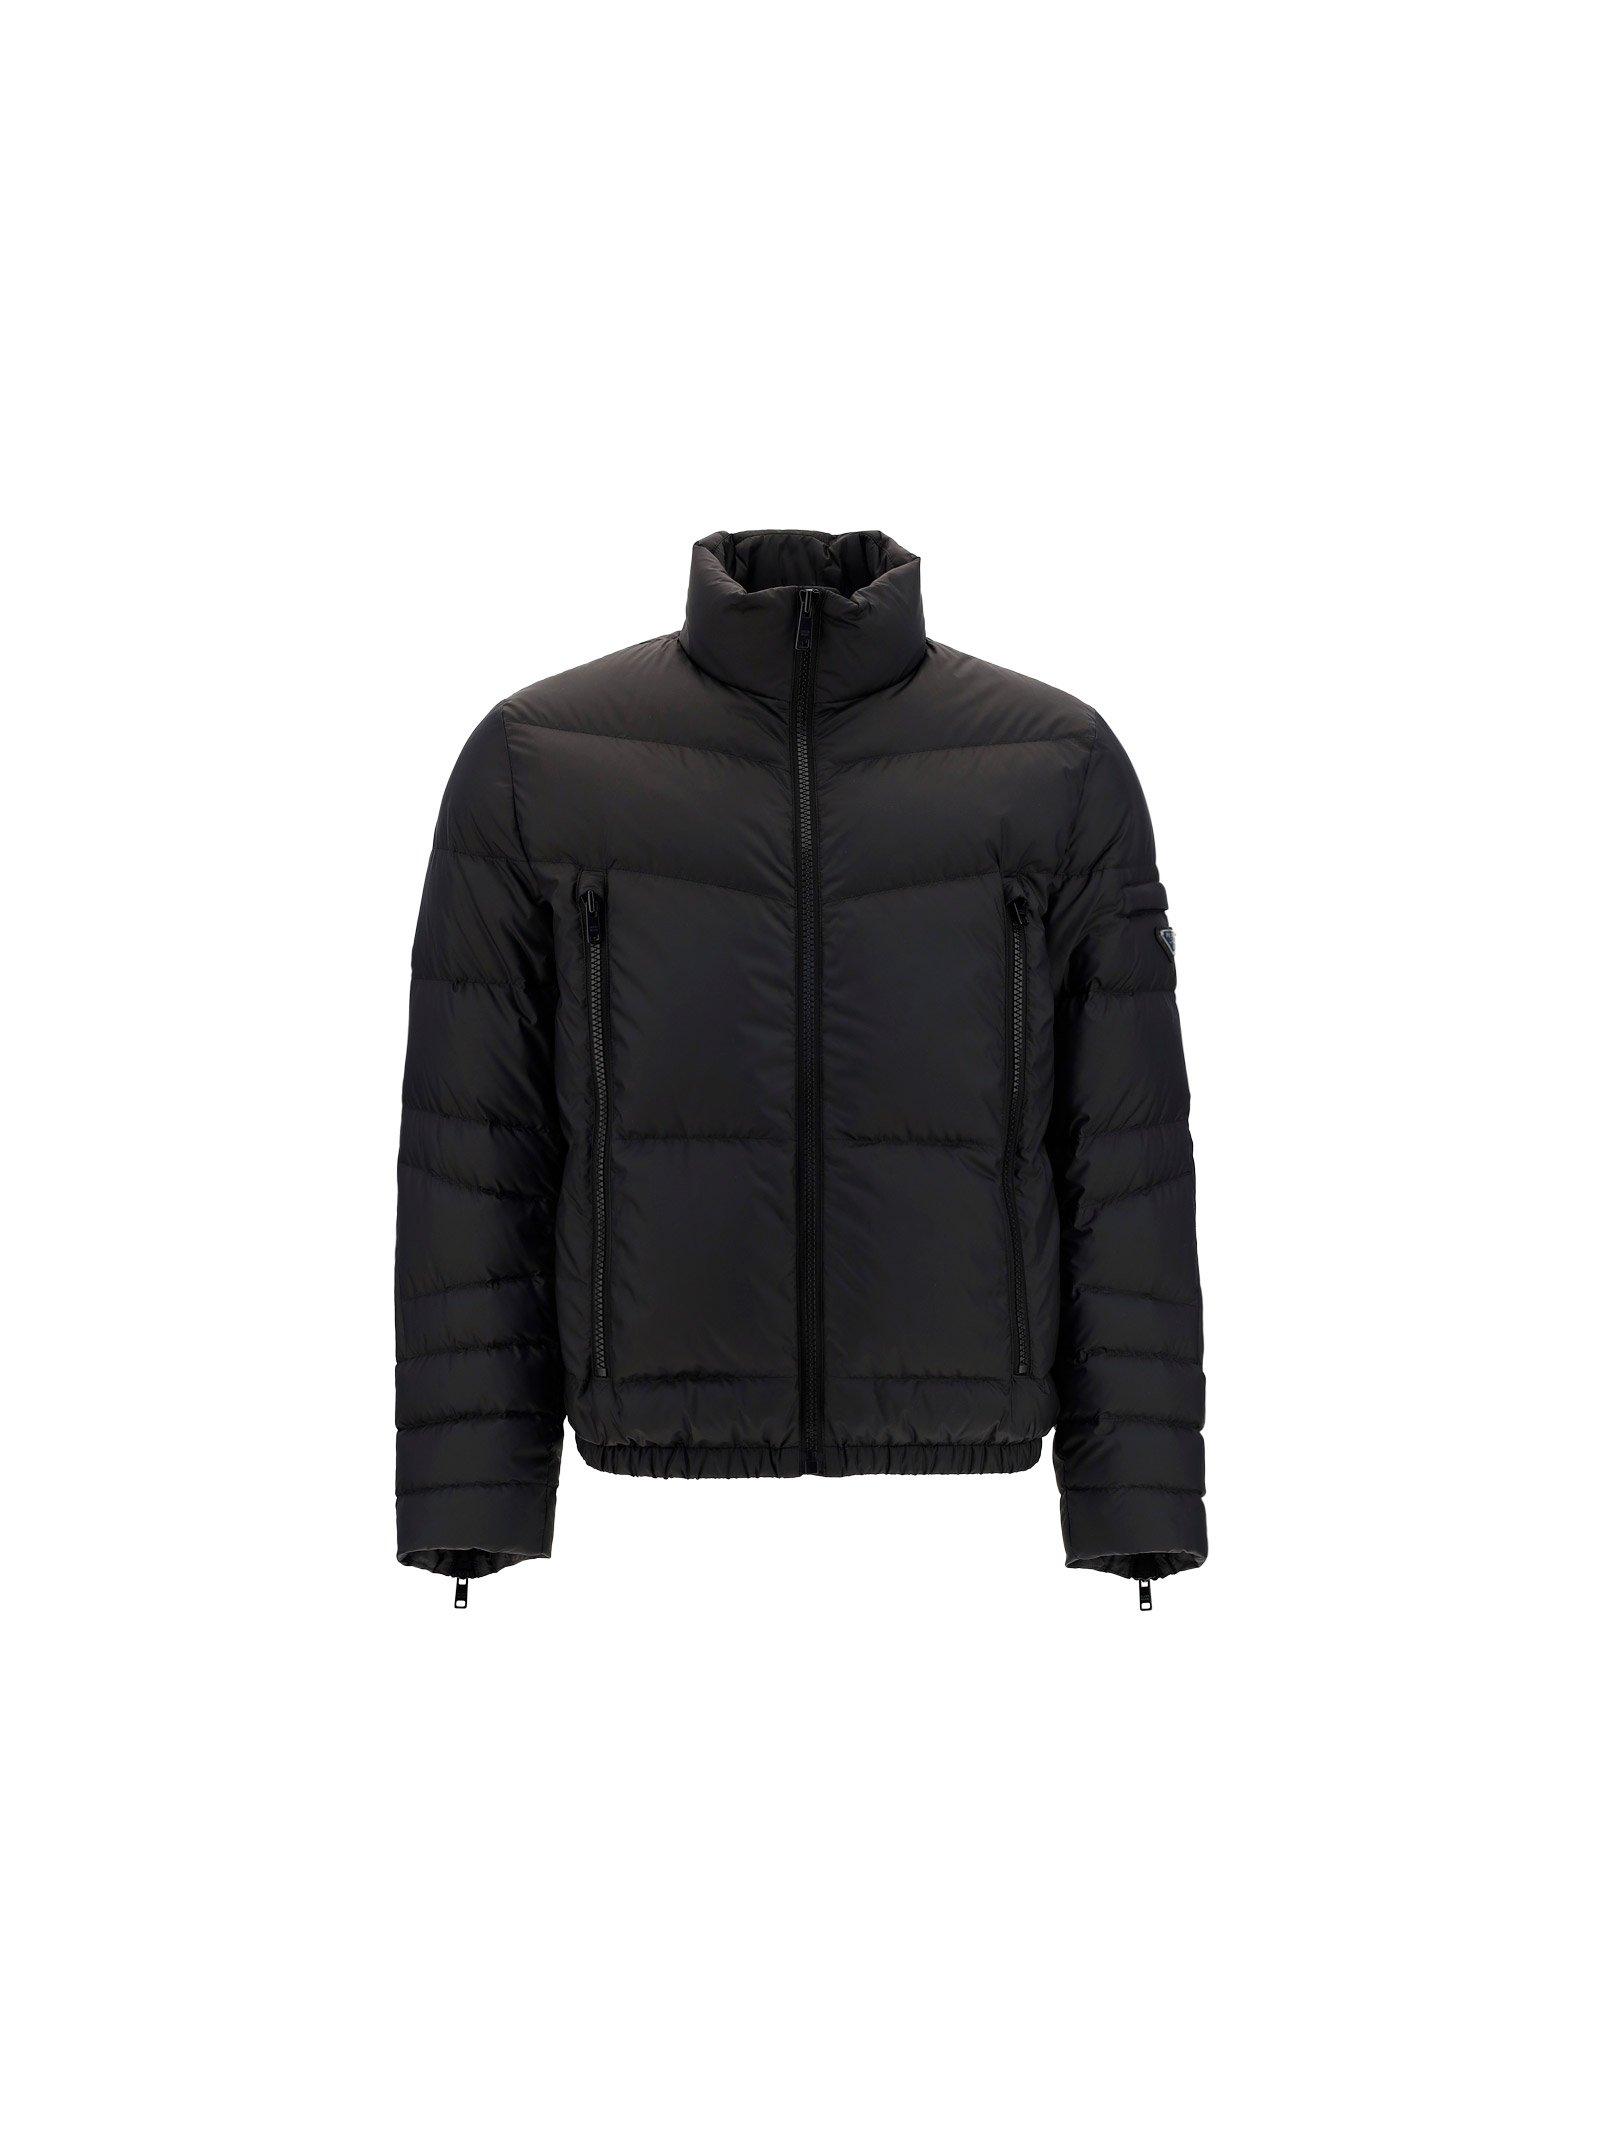 Prada Synthetic Triangle Logo Puffer Jacket in Black for Men - Lyst